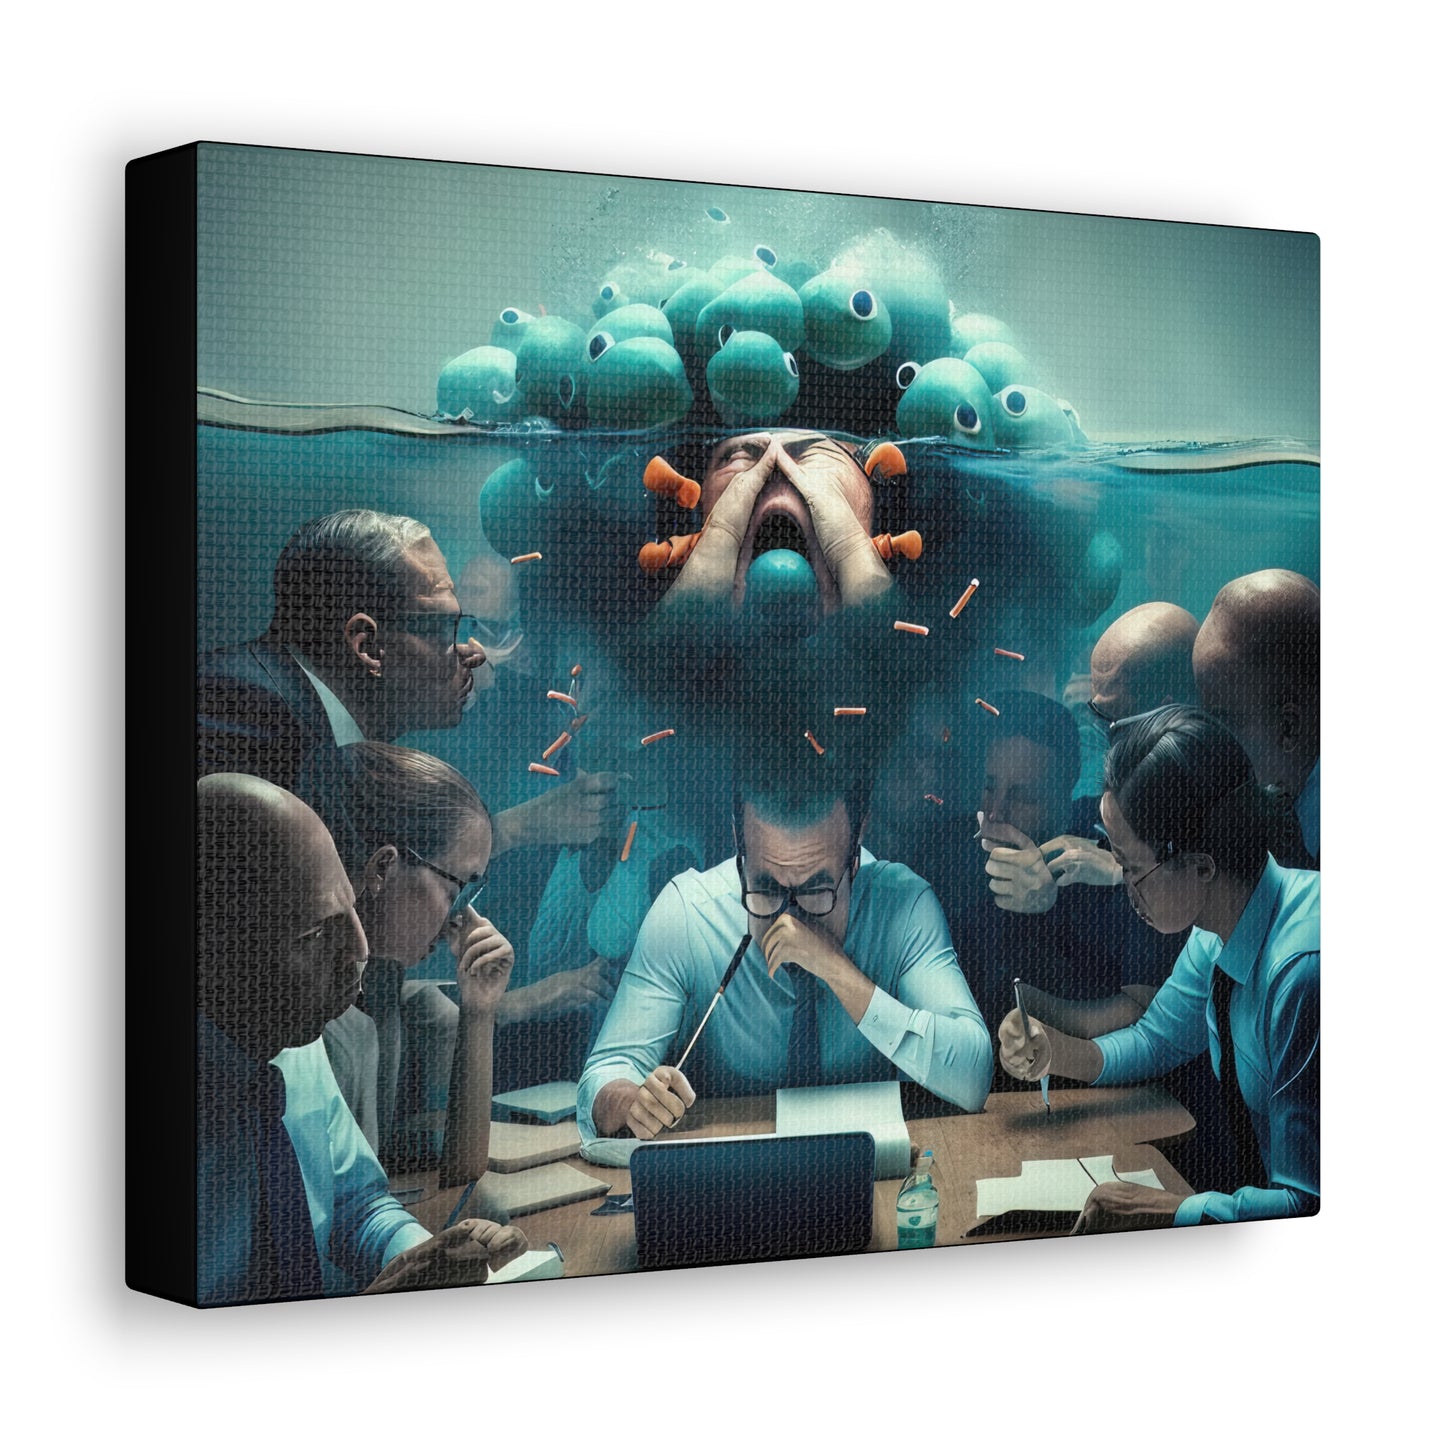 Under Water At The Office Under Corporate Stress And Pressure , Employee Frustration Canvas Gallery Wraps